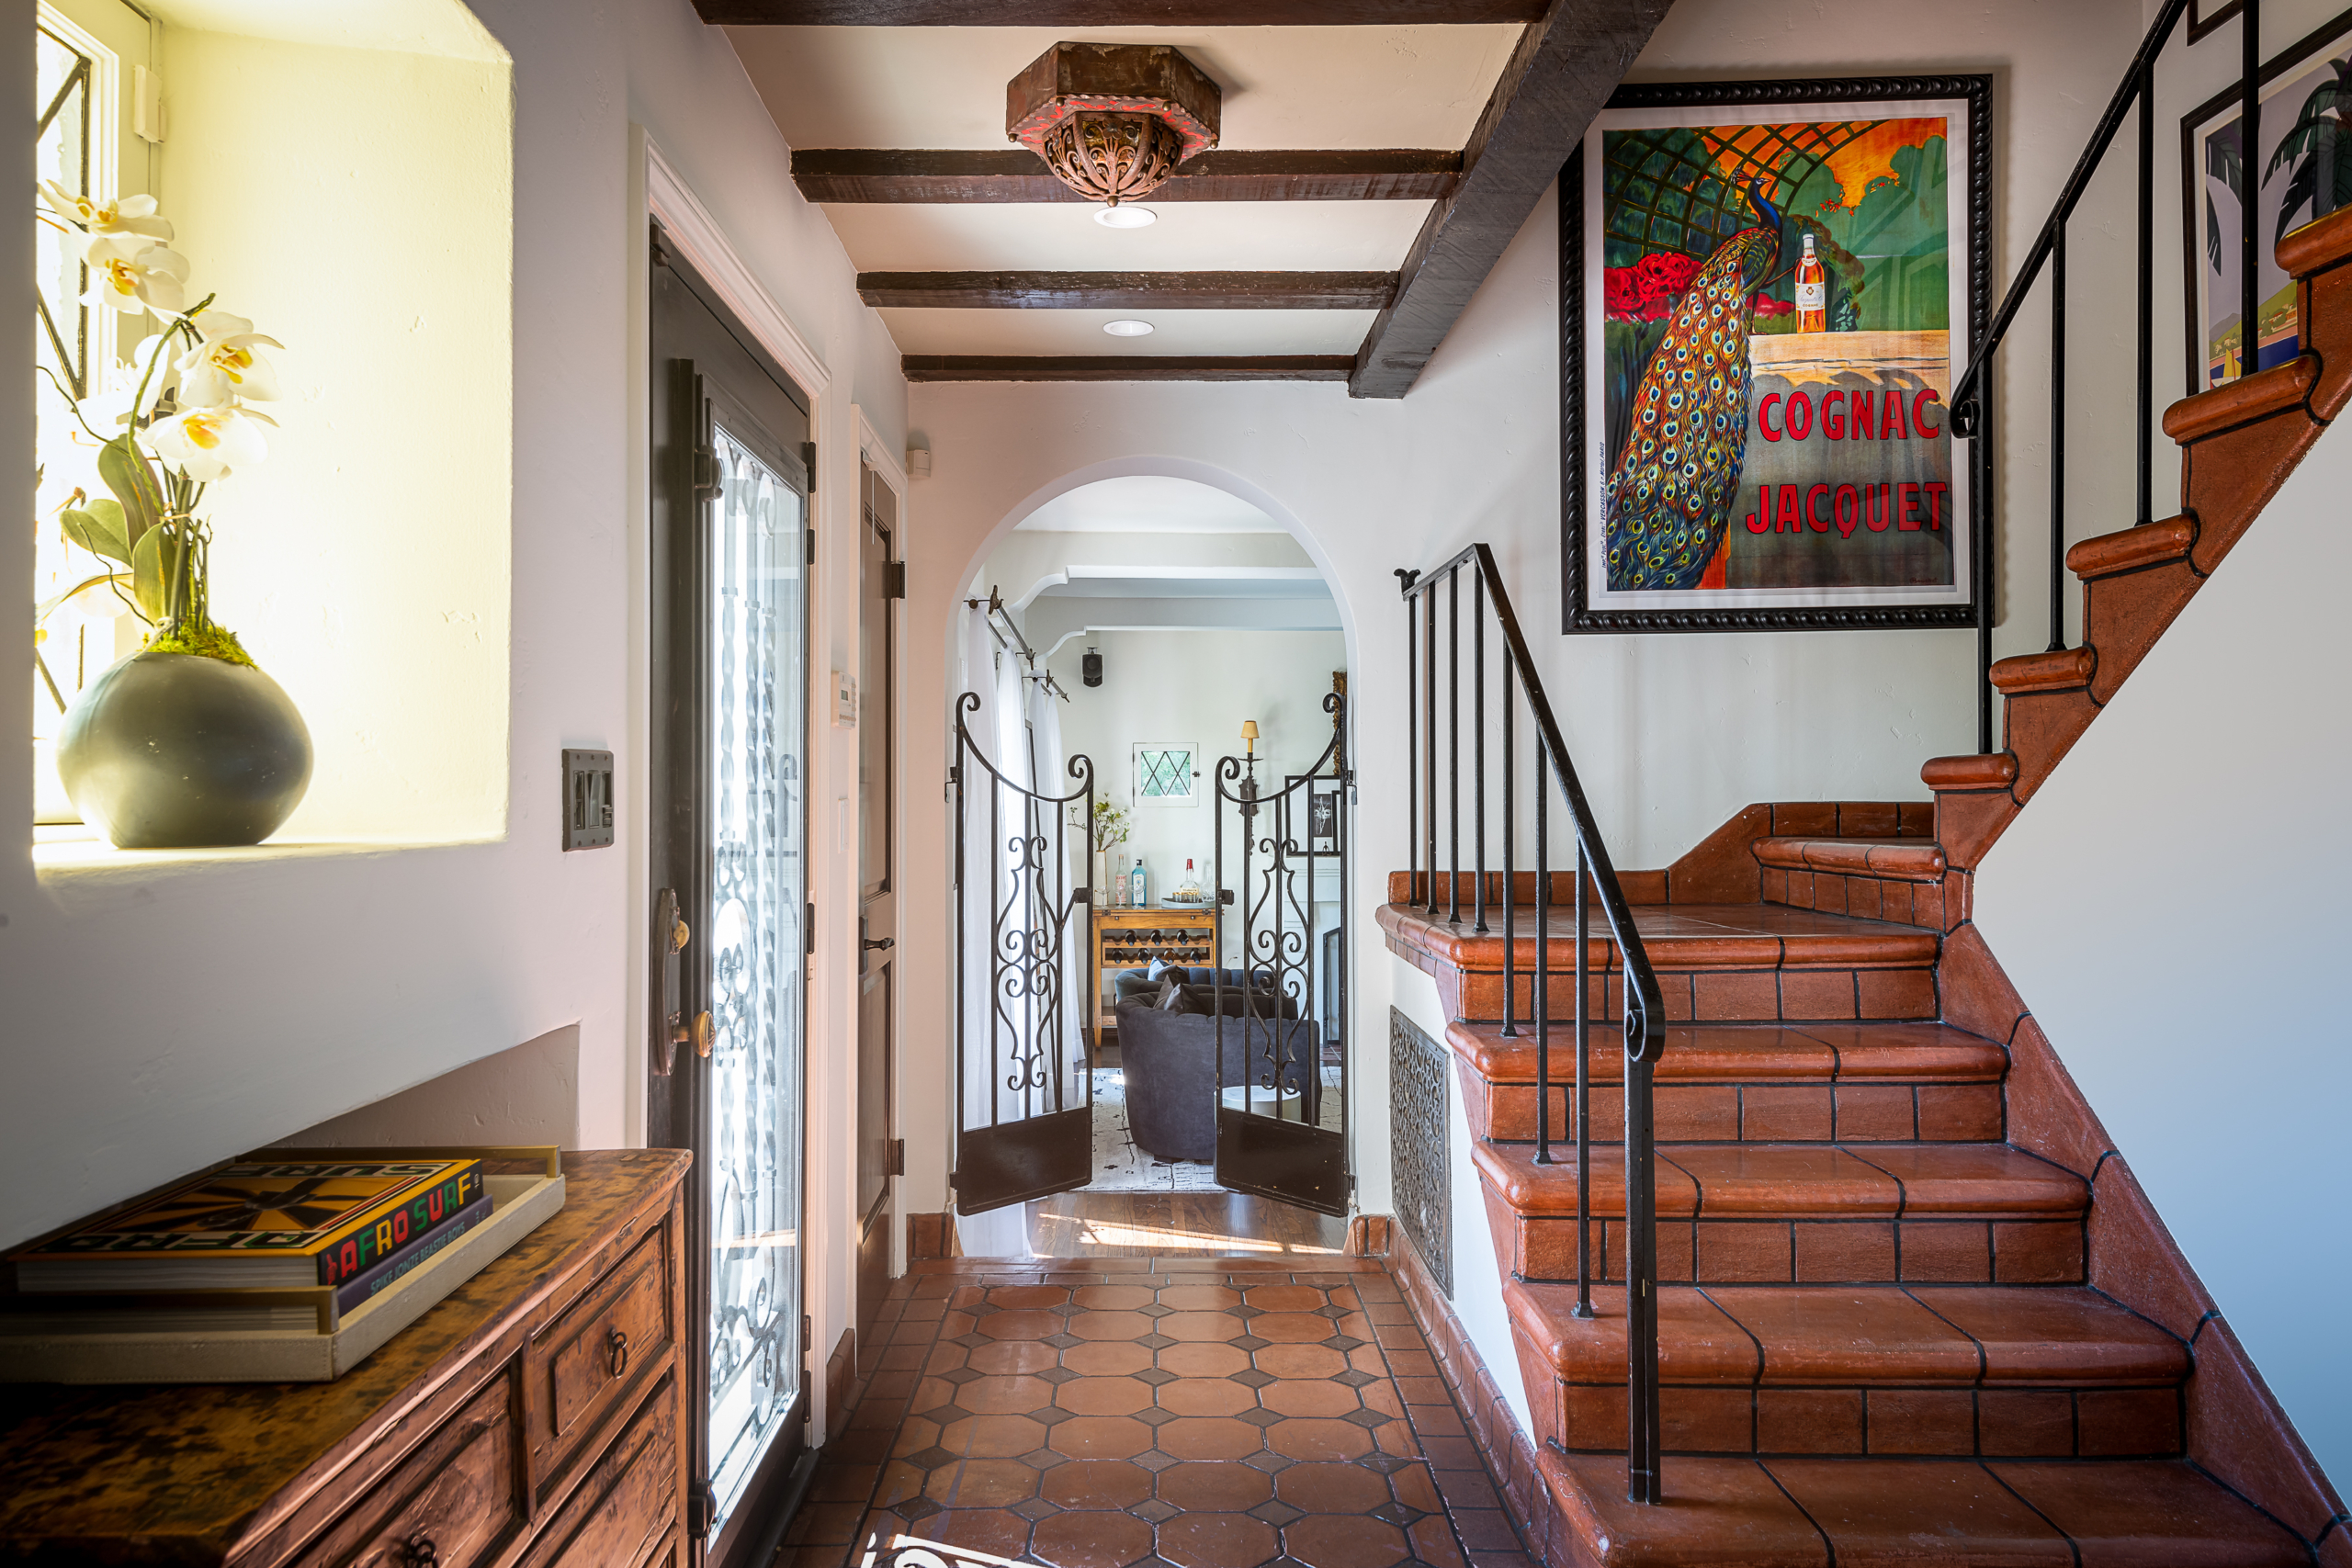 Spanish style hallway with Spanish tile flooring and stairs, hand-hewn dark beams and wrought iron railing and gate